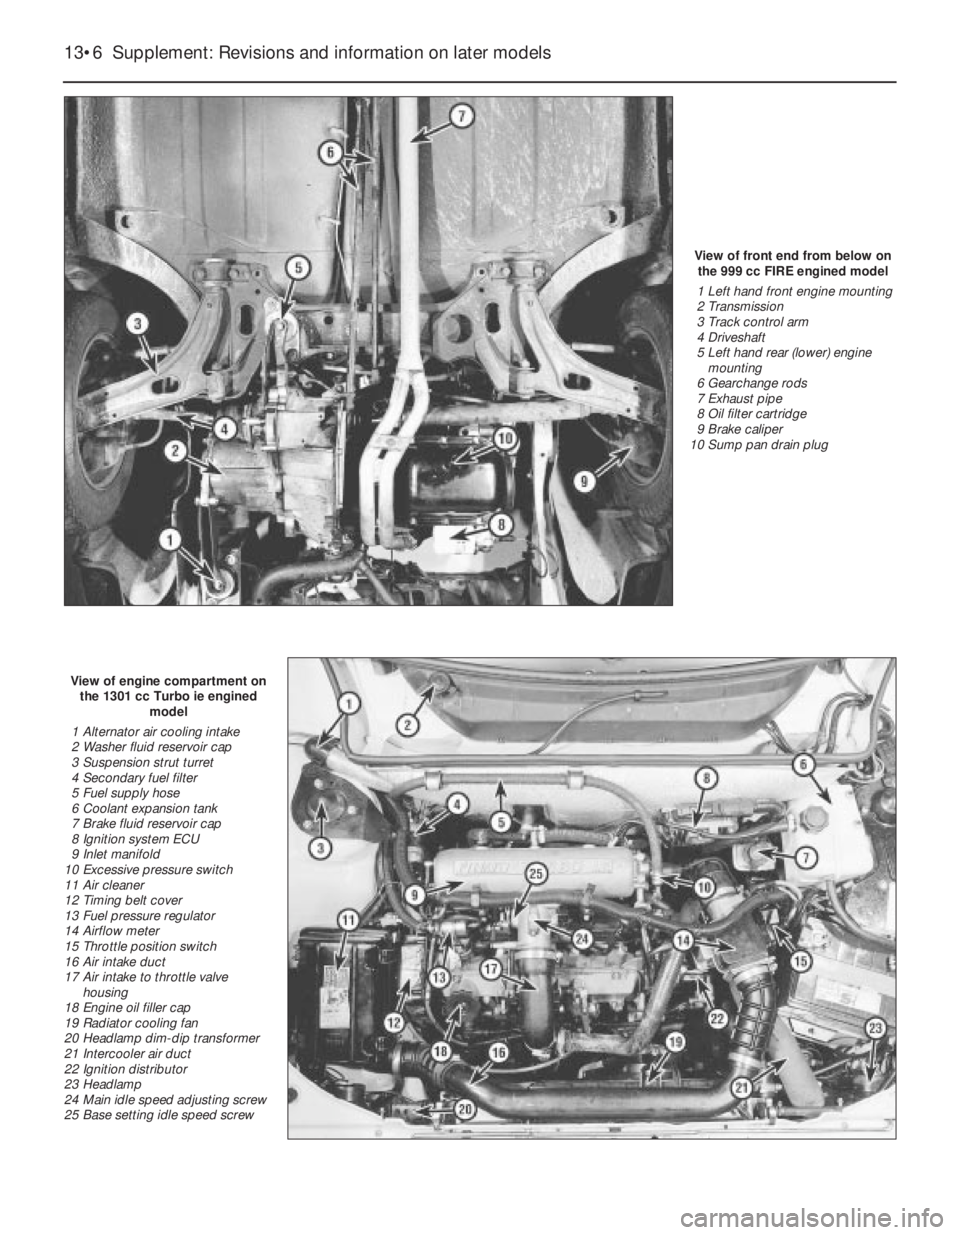 FIAT UNO 1983  Service Owners Manual View of front end from below on
the 999 cc FIRE engined model
1 Left hand front engine mounting
2 Transmission
3 Track control arm
4 Driveshaft
5 Left hand rear (lower) engine
mounting
6 Gearchange ro